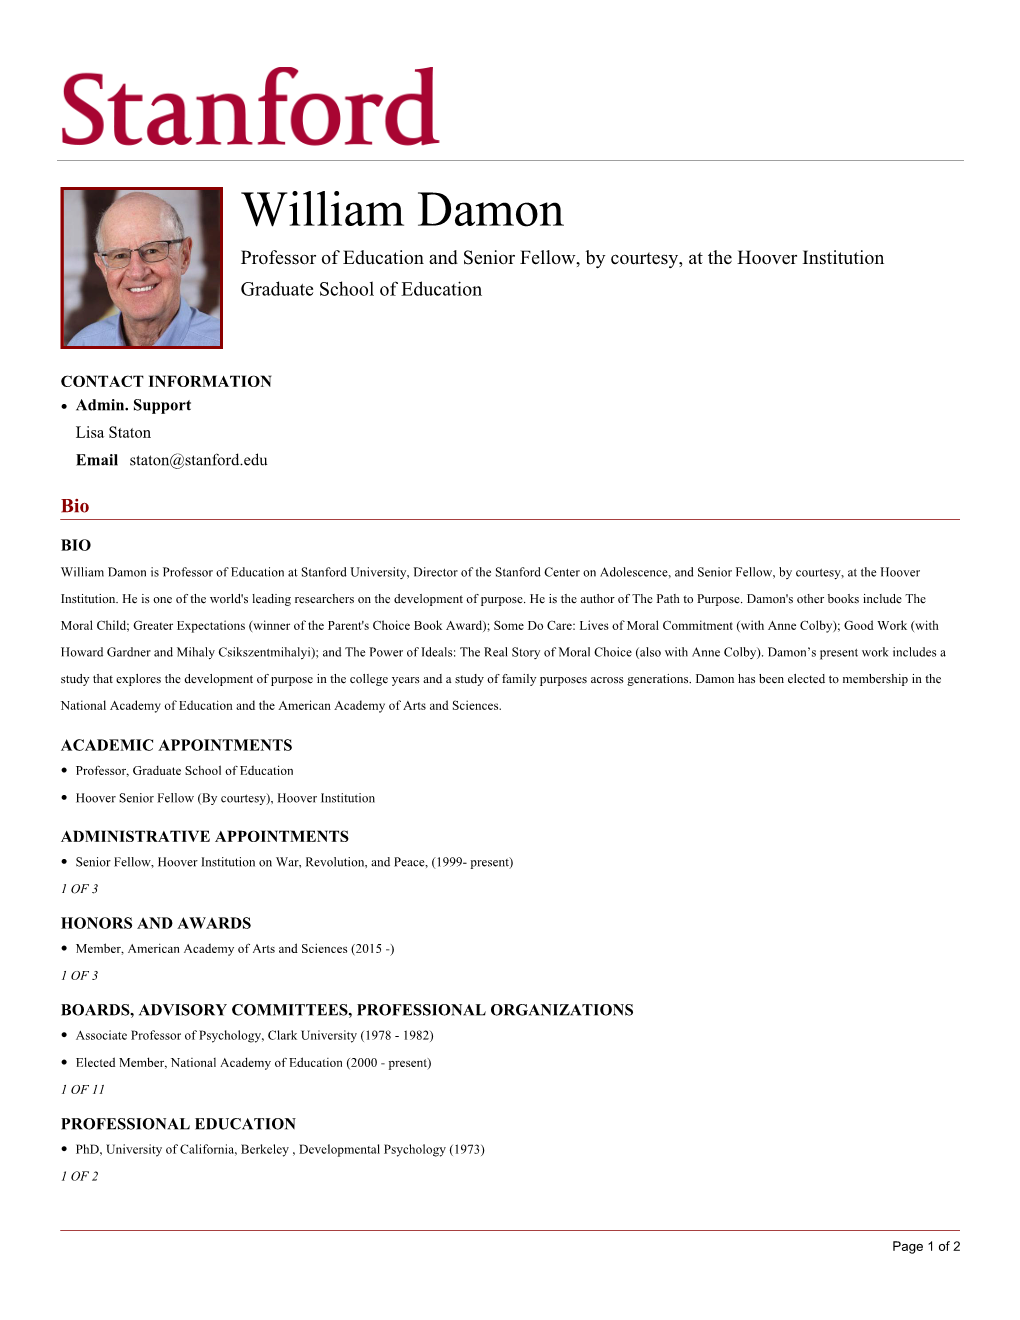 William Damon Professor of Education and Senior Fellow, by Courtesy, at the Hoover Institution Graduate School of Education